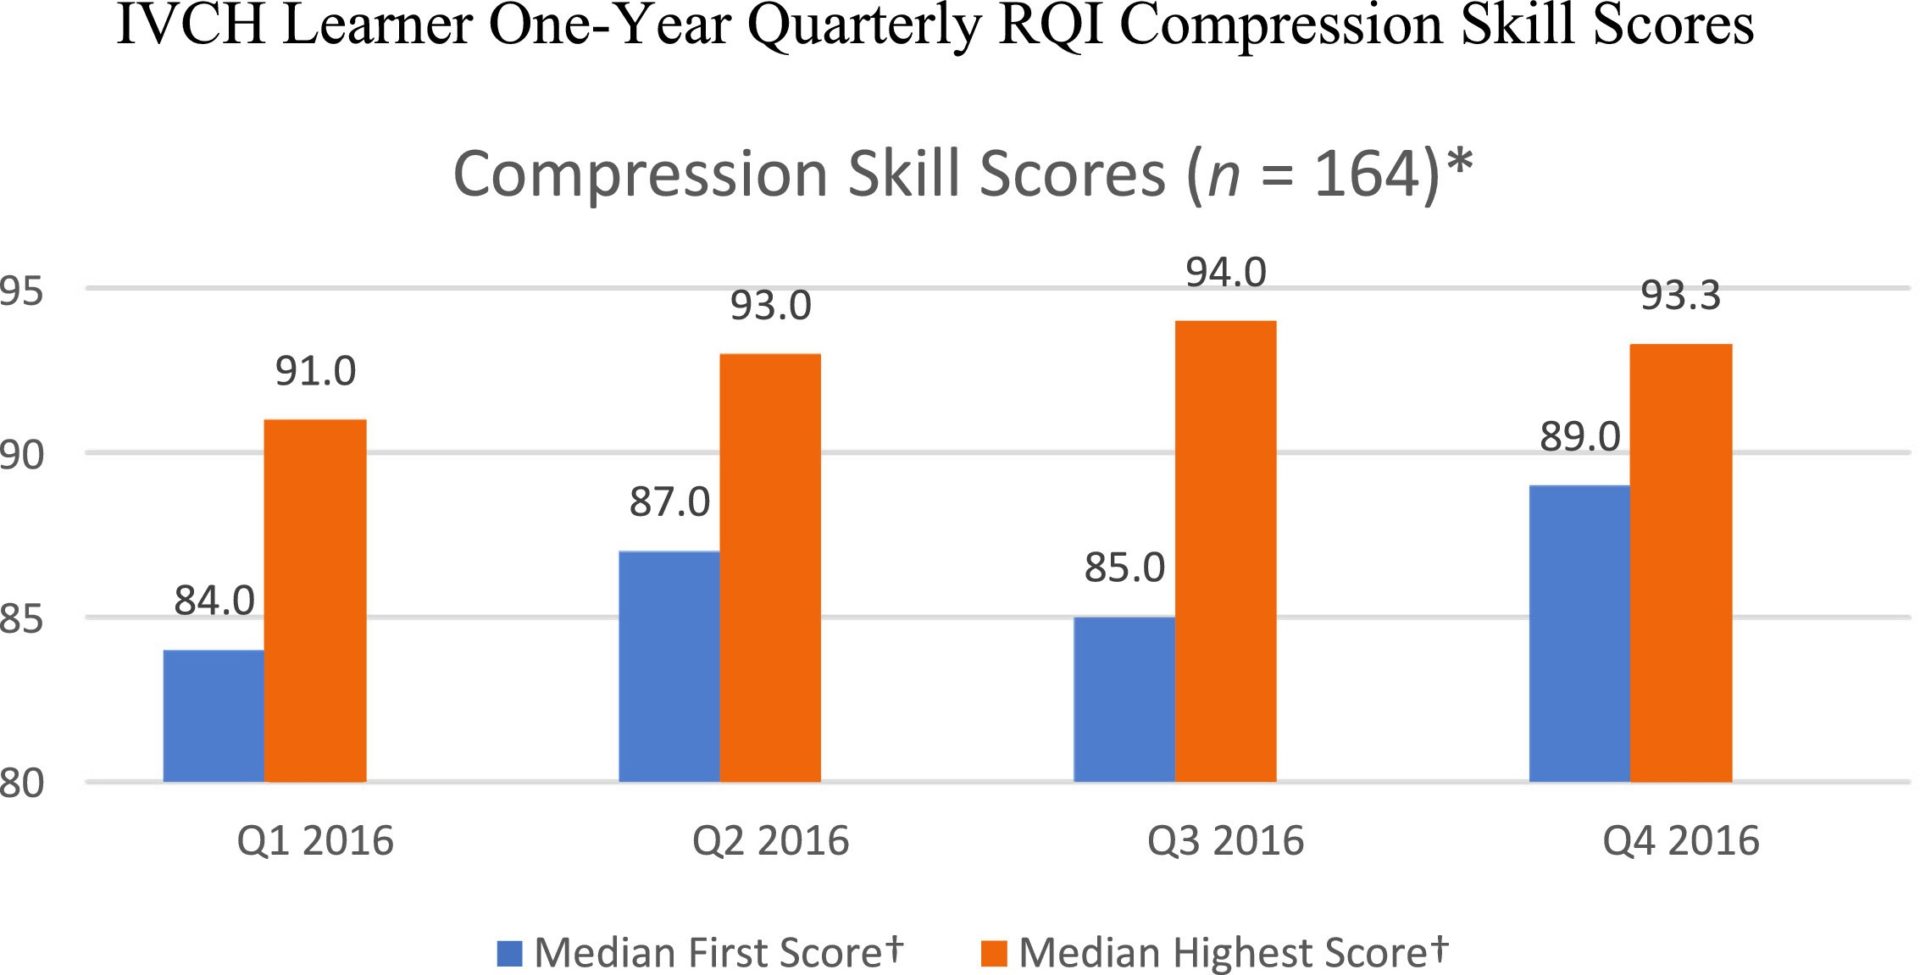 IVCH Learner One-Year Quarterly RQI Compression Skill Scores Chart. Detailed description below chart.